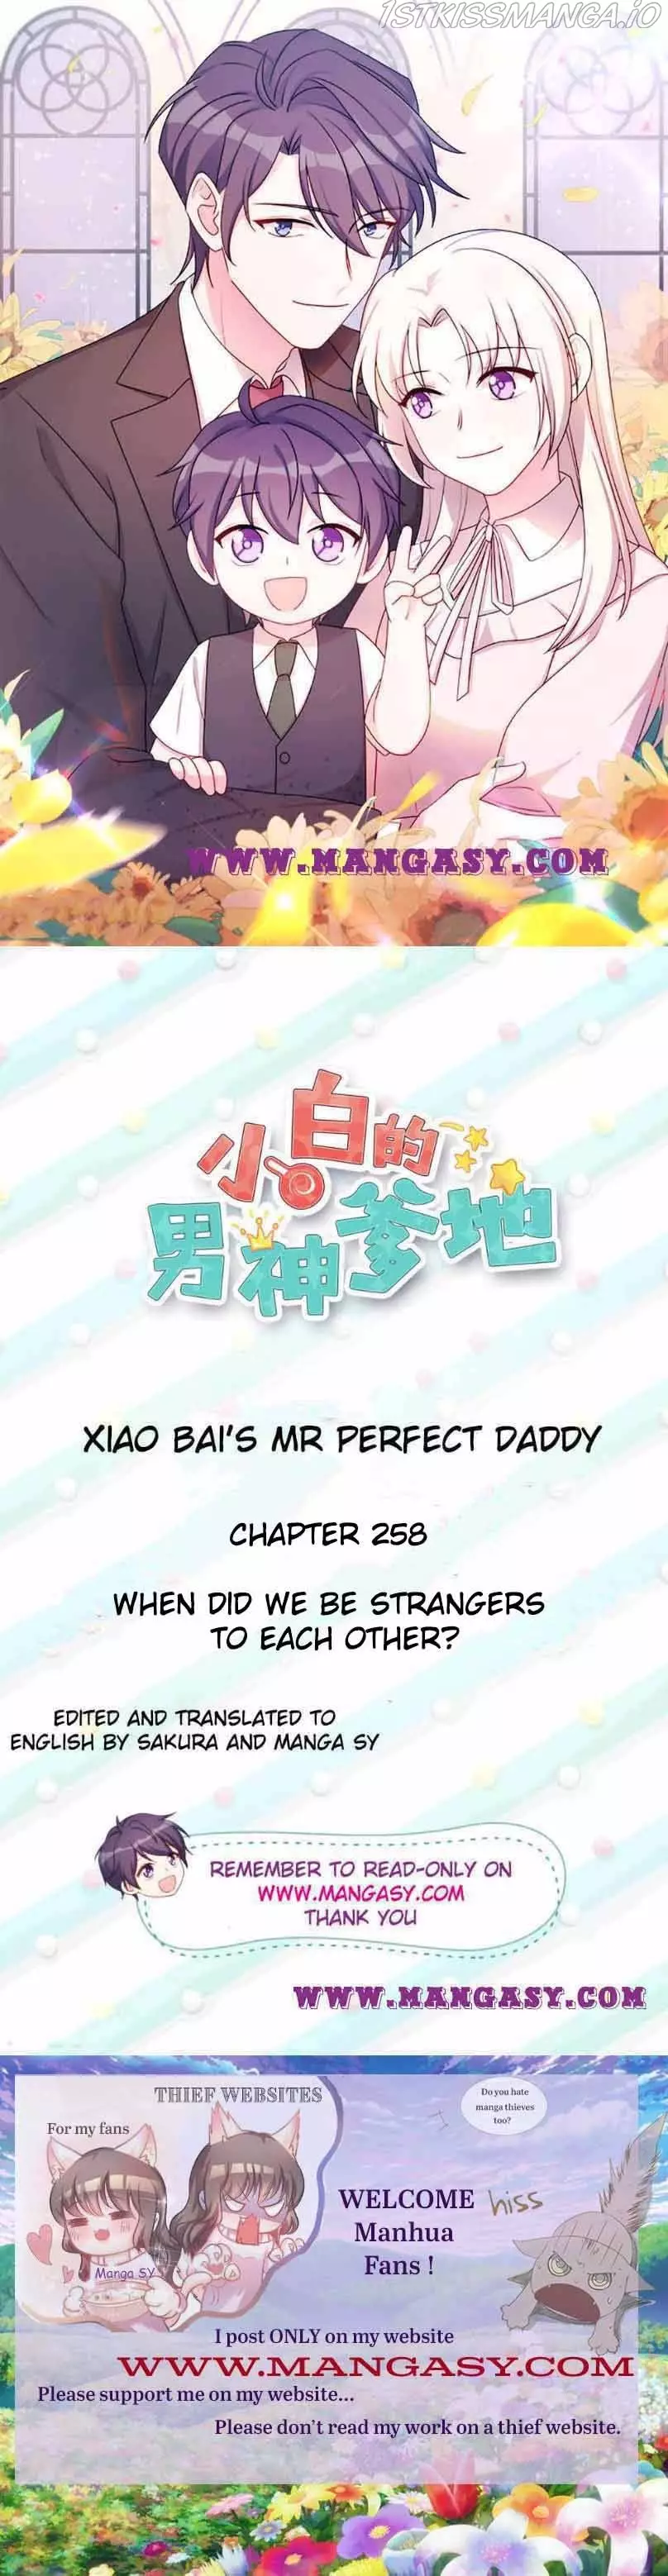 Xiao Bai’S Father Is A Wonderful Person - 258 page 1-4ba34bfd